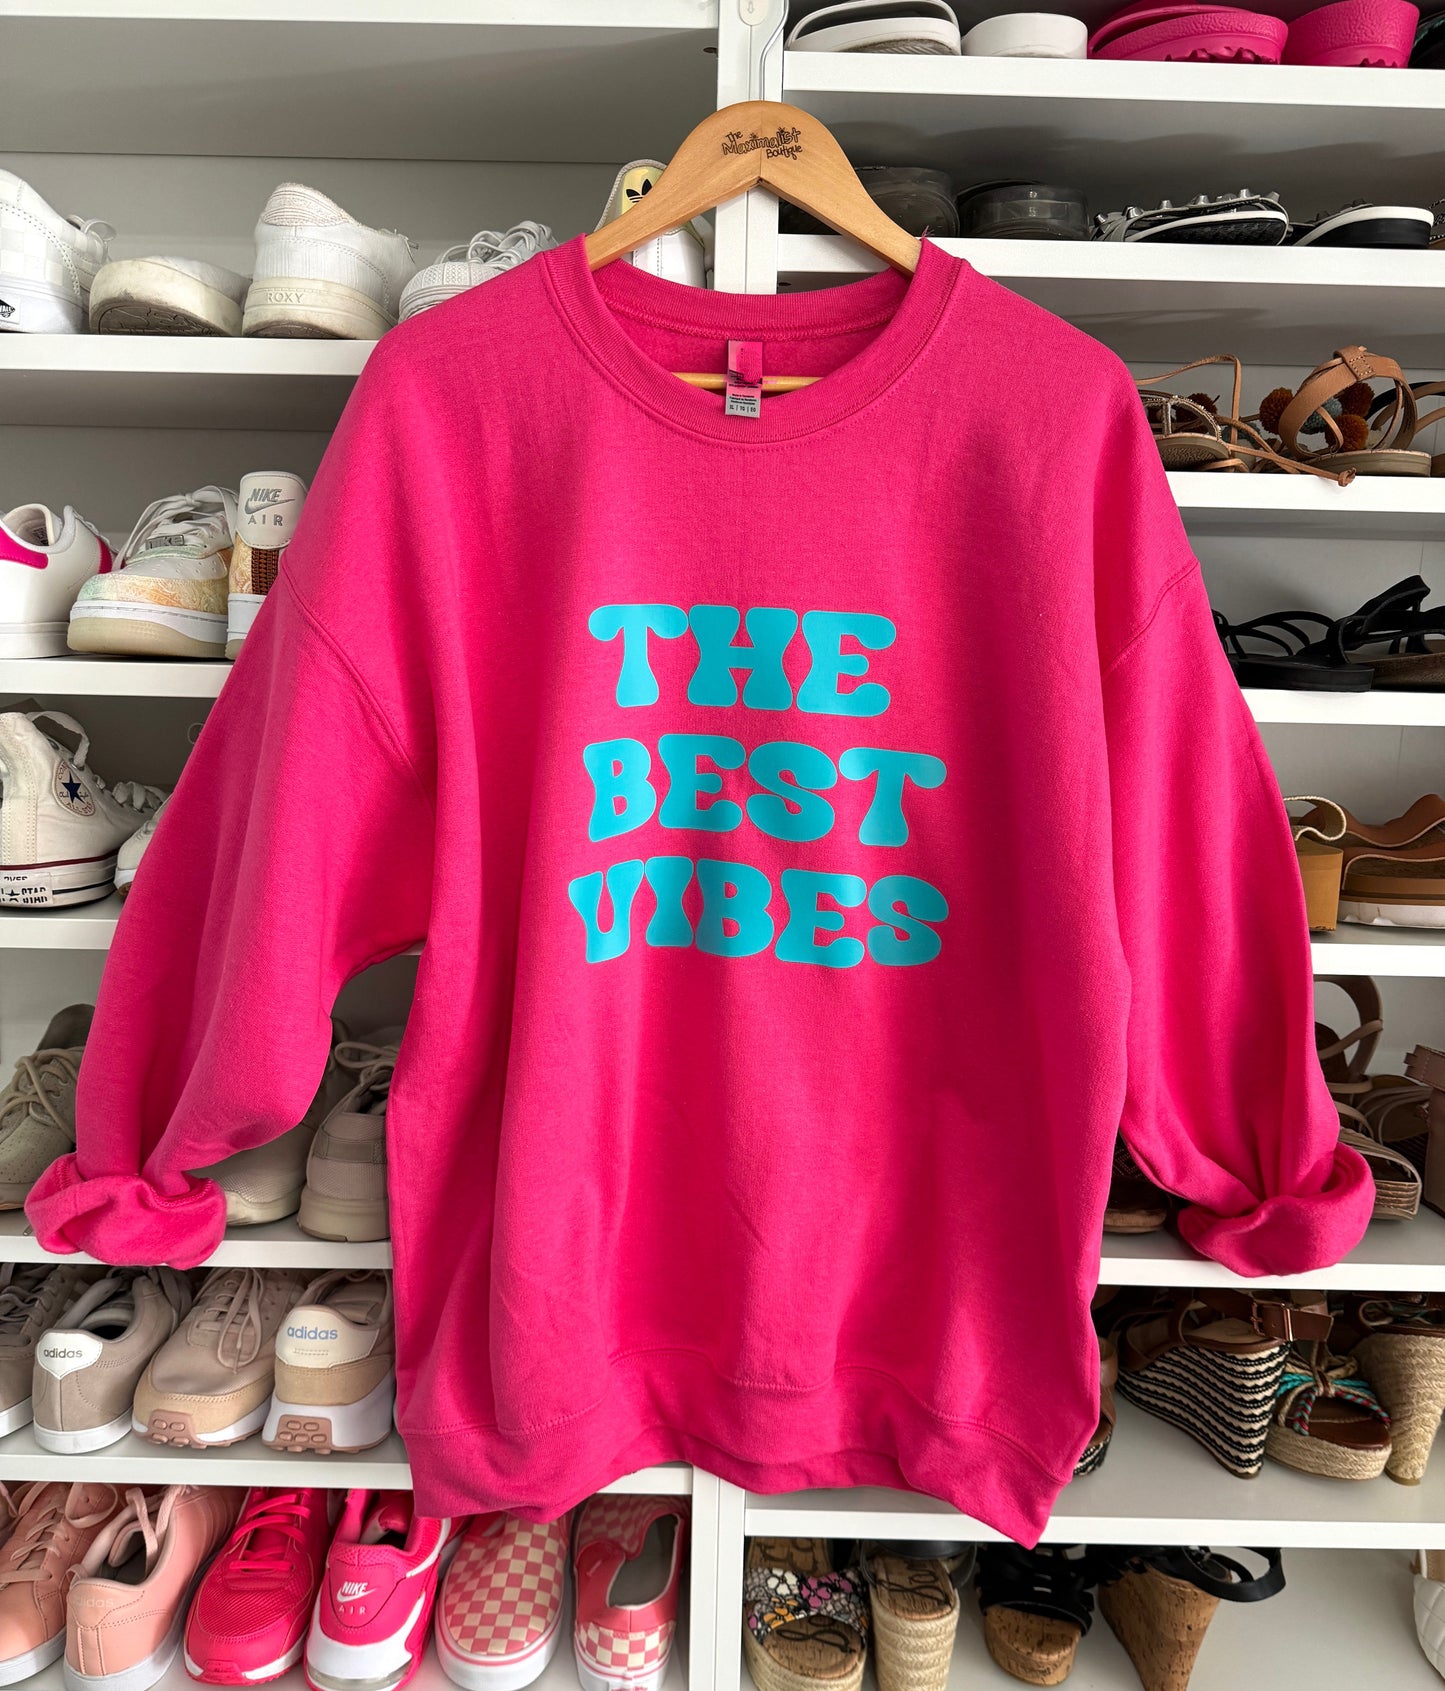 Pink sweatshirt with teal graphic 